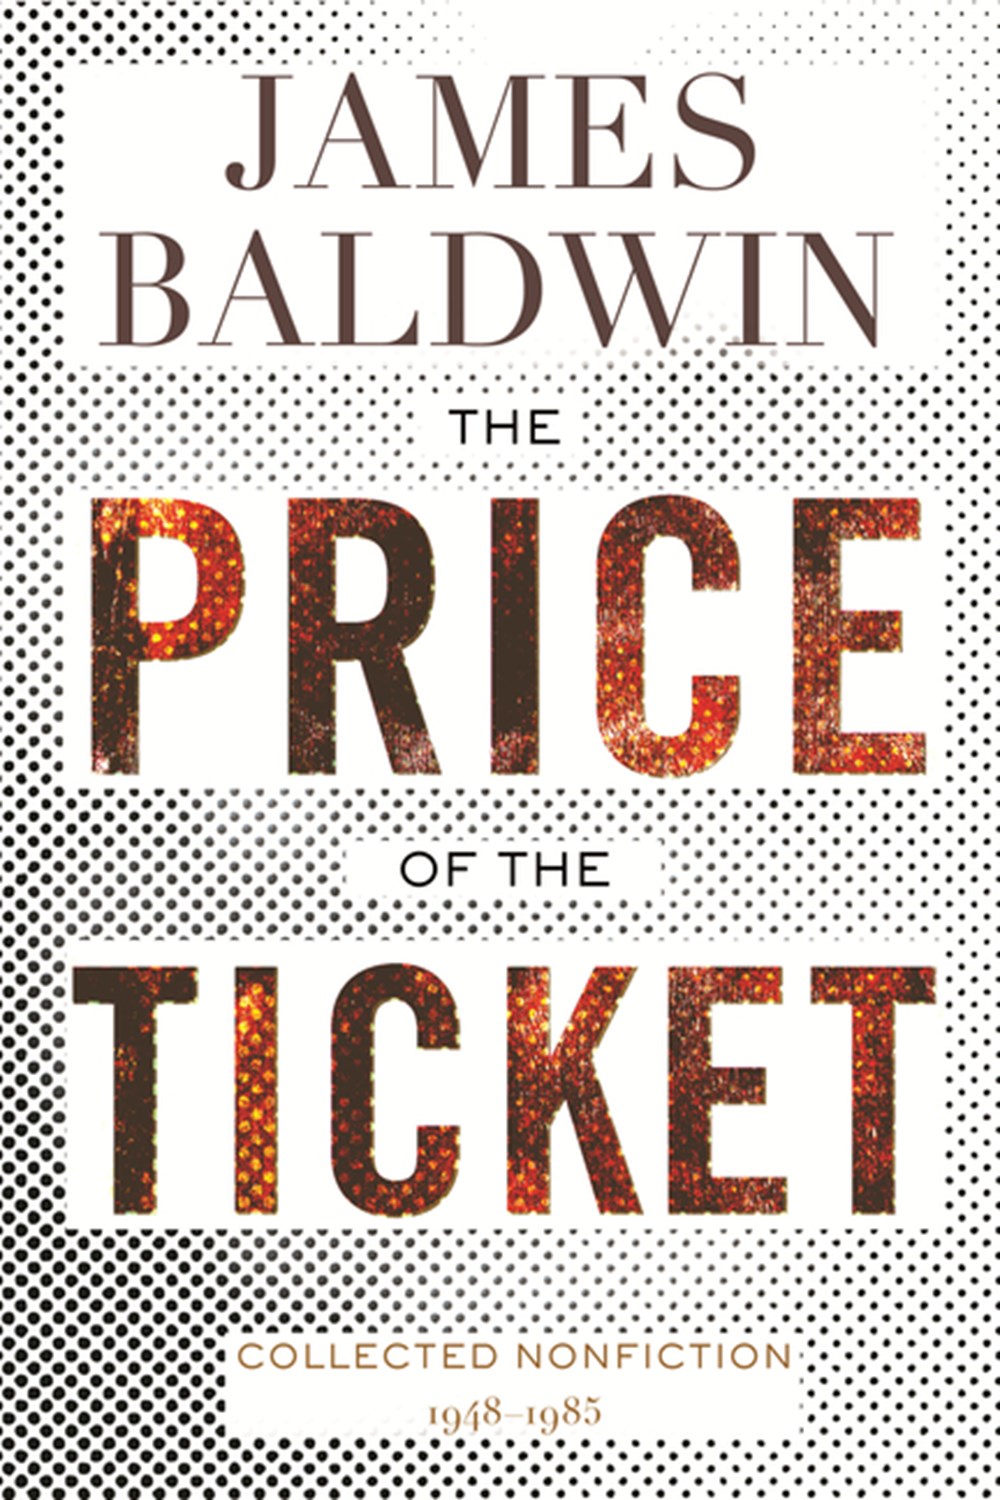 Price of the Ticket Collected Nonfiction: 1948-1985